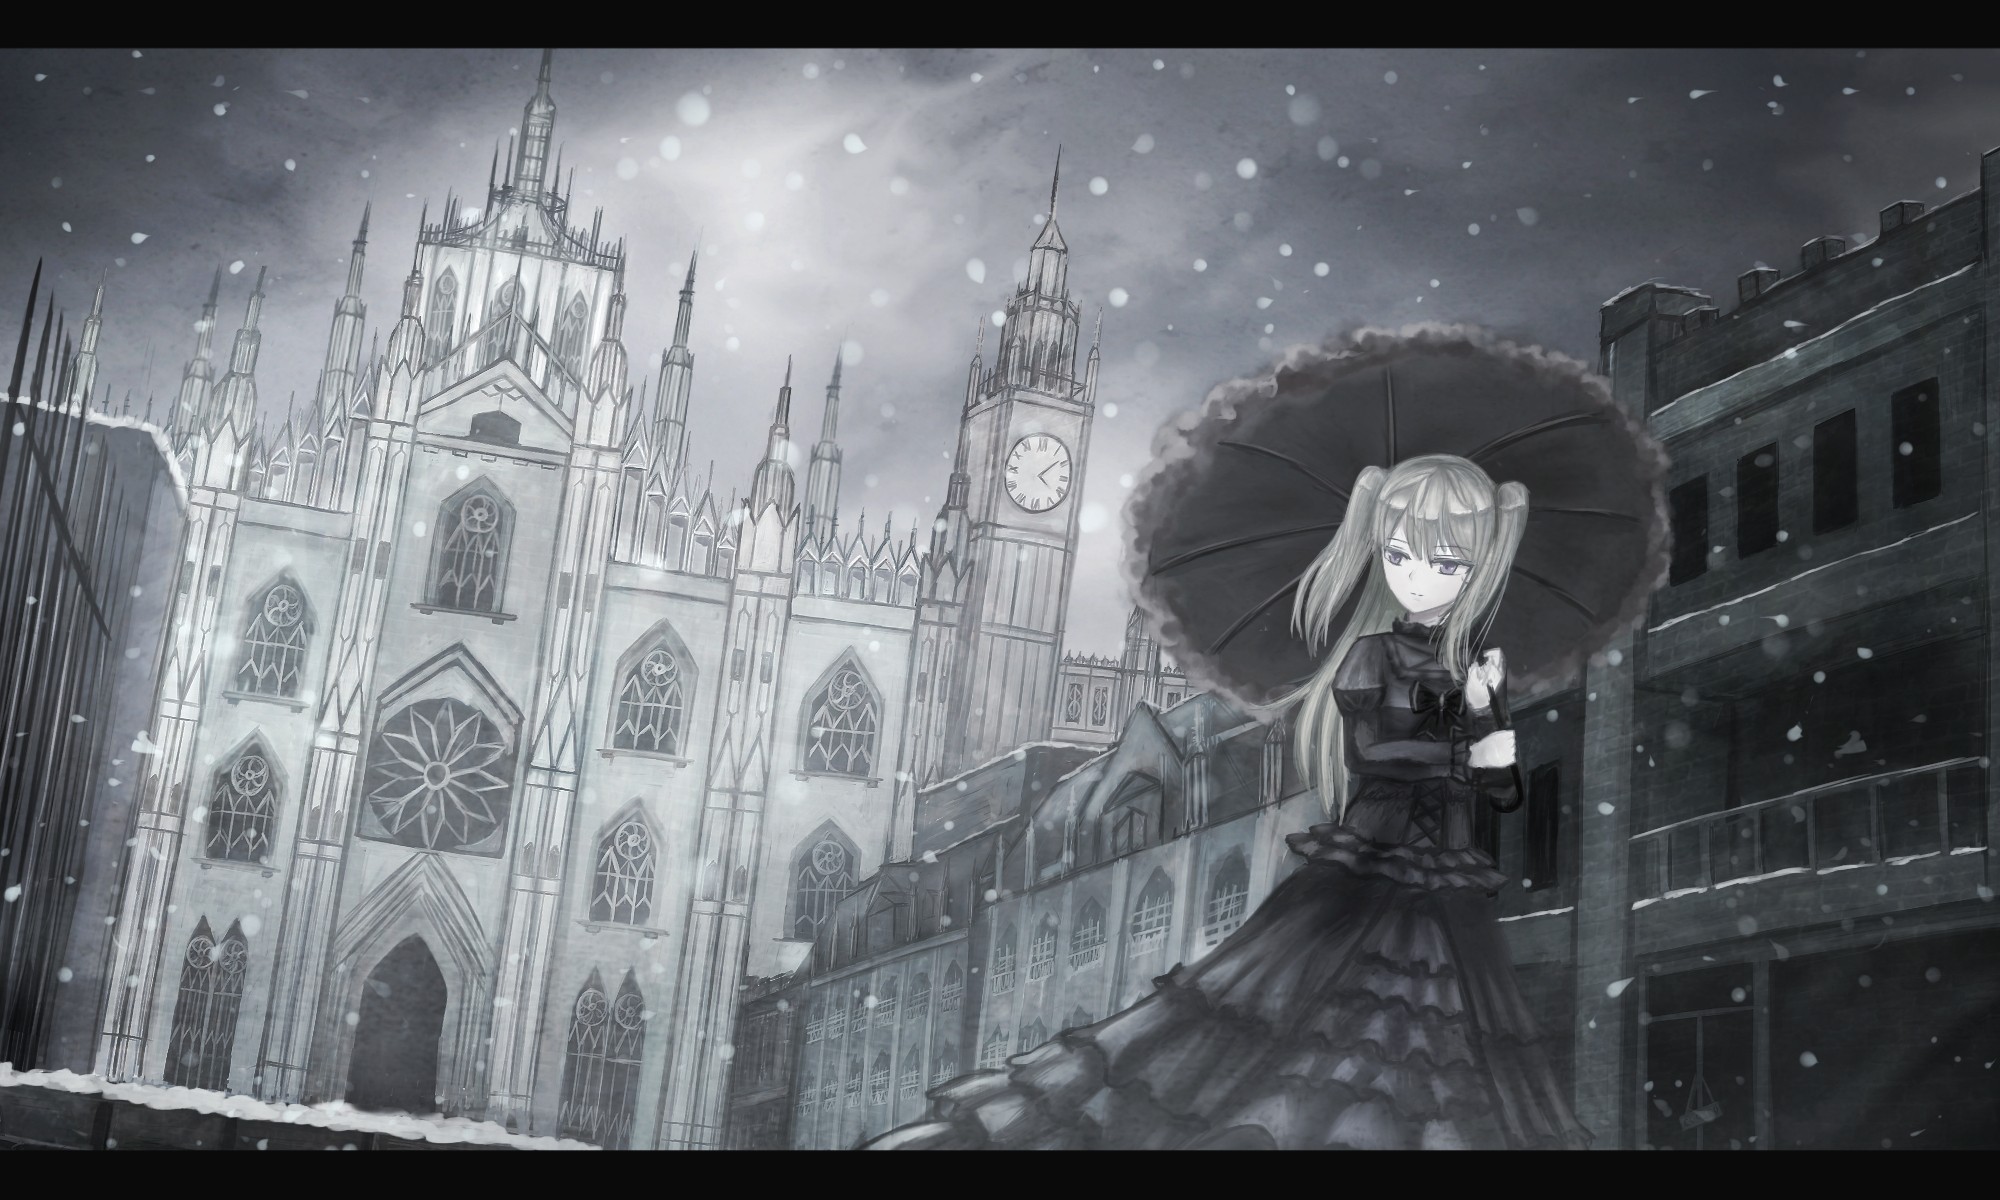 Anime 2000x1200 anime anime girls long hair snow gothic cathedral umbrella women with umbrella dress women outdoors building looking away clocks facade